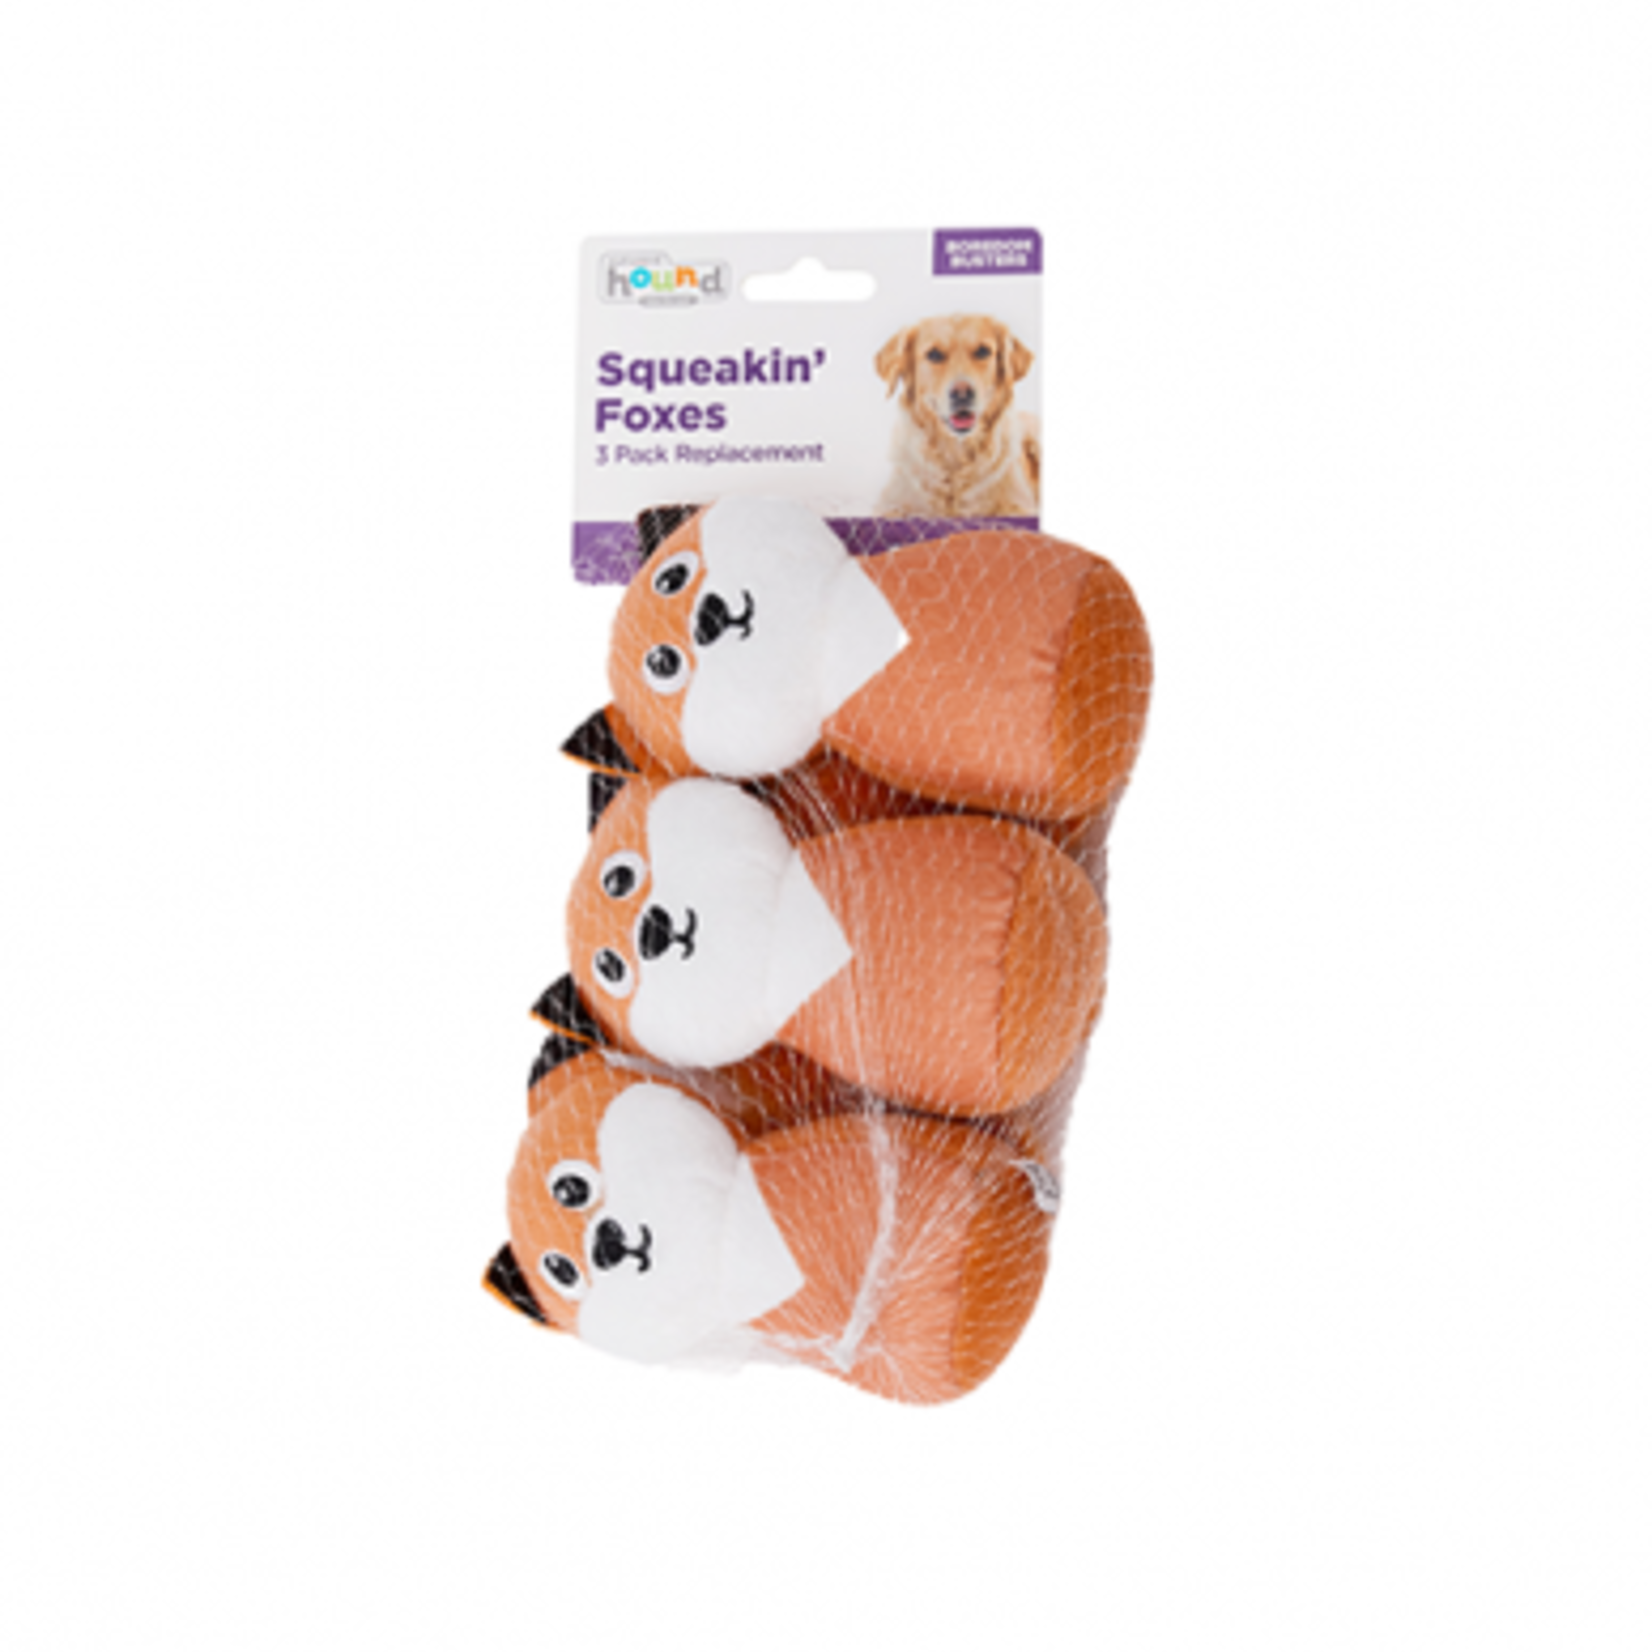 Outward Hound Squeakin' Fox Replacement - pack of 3